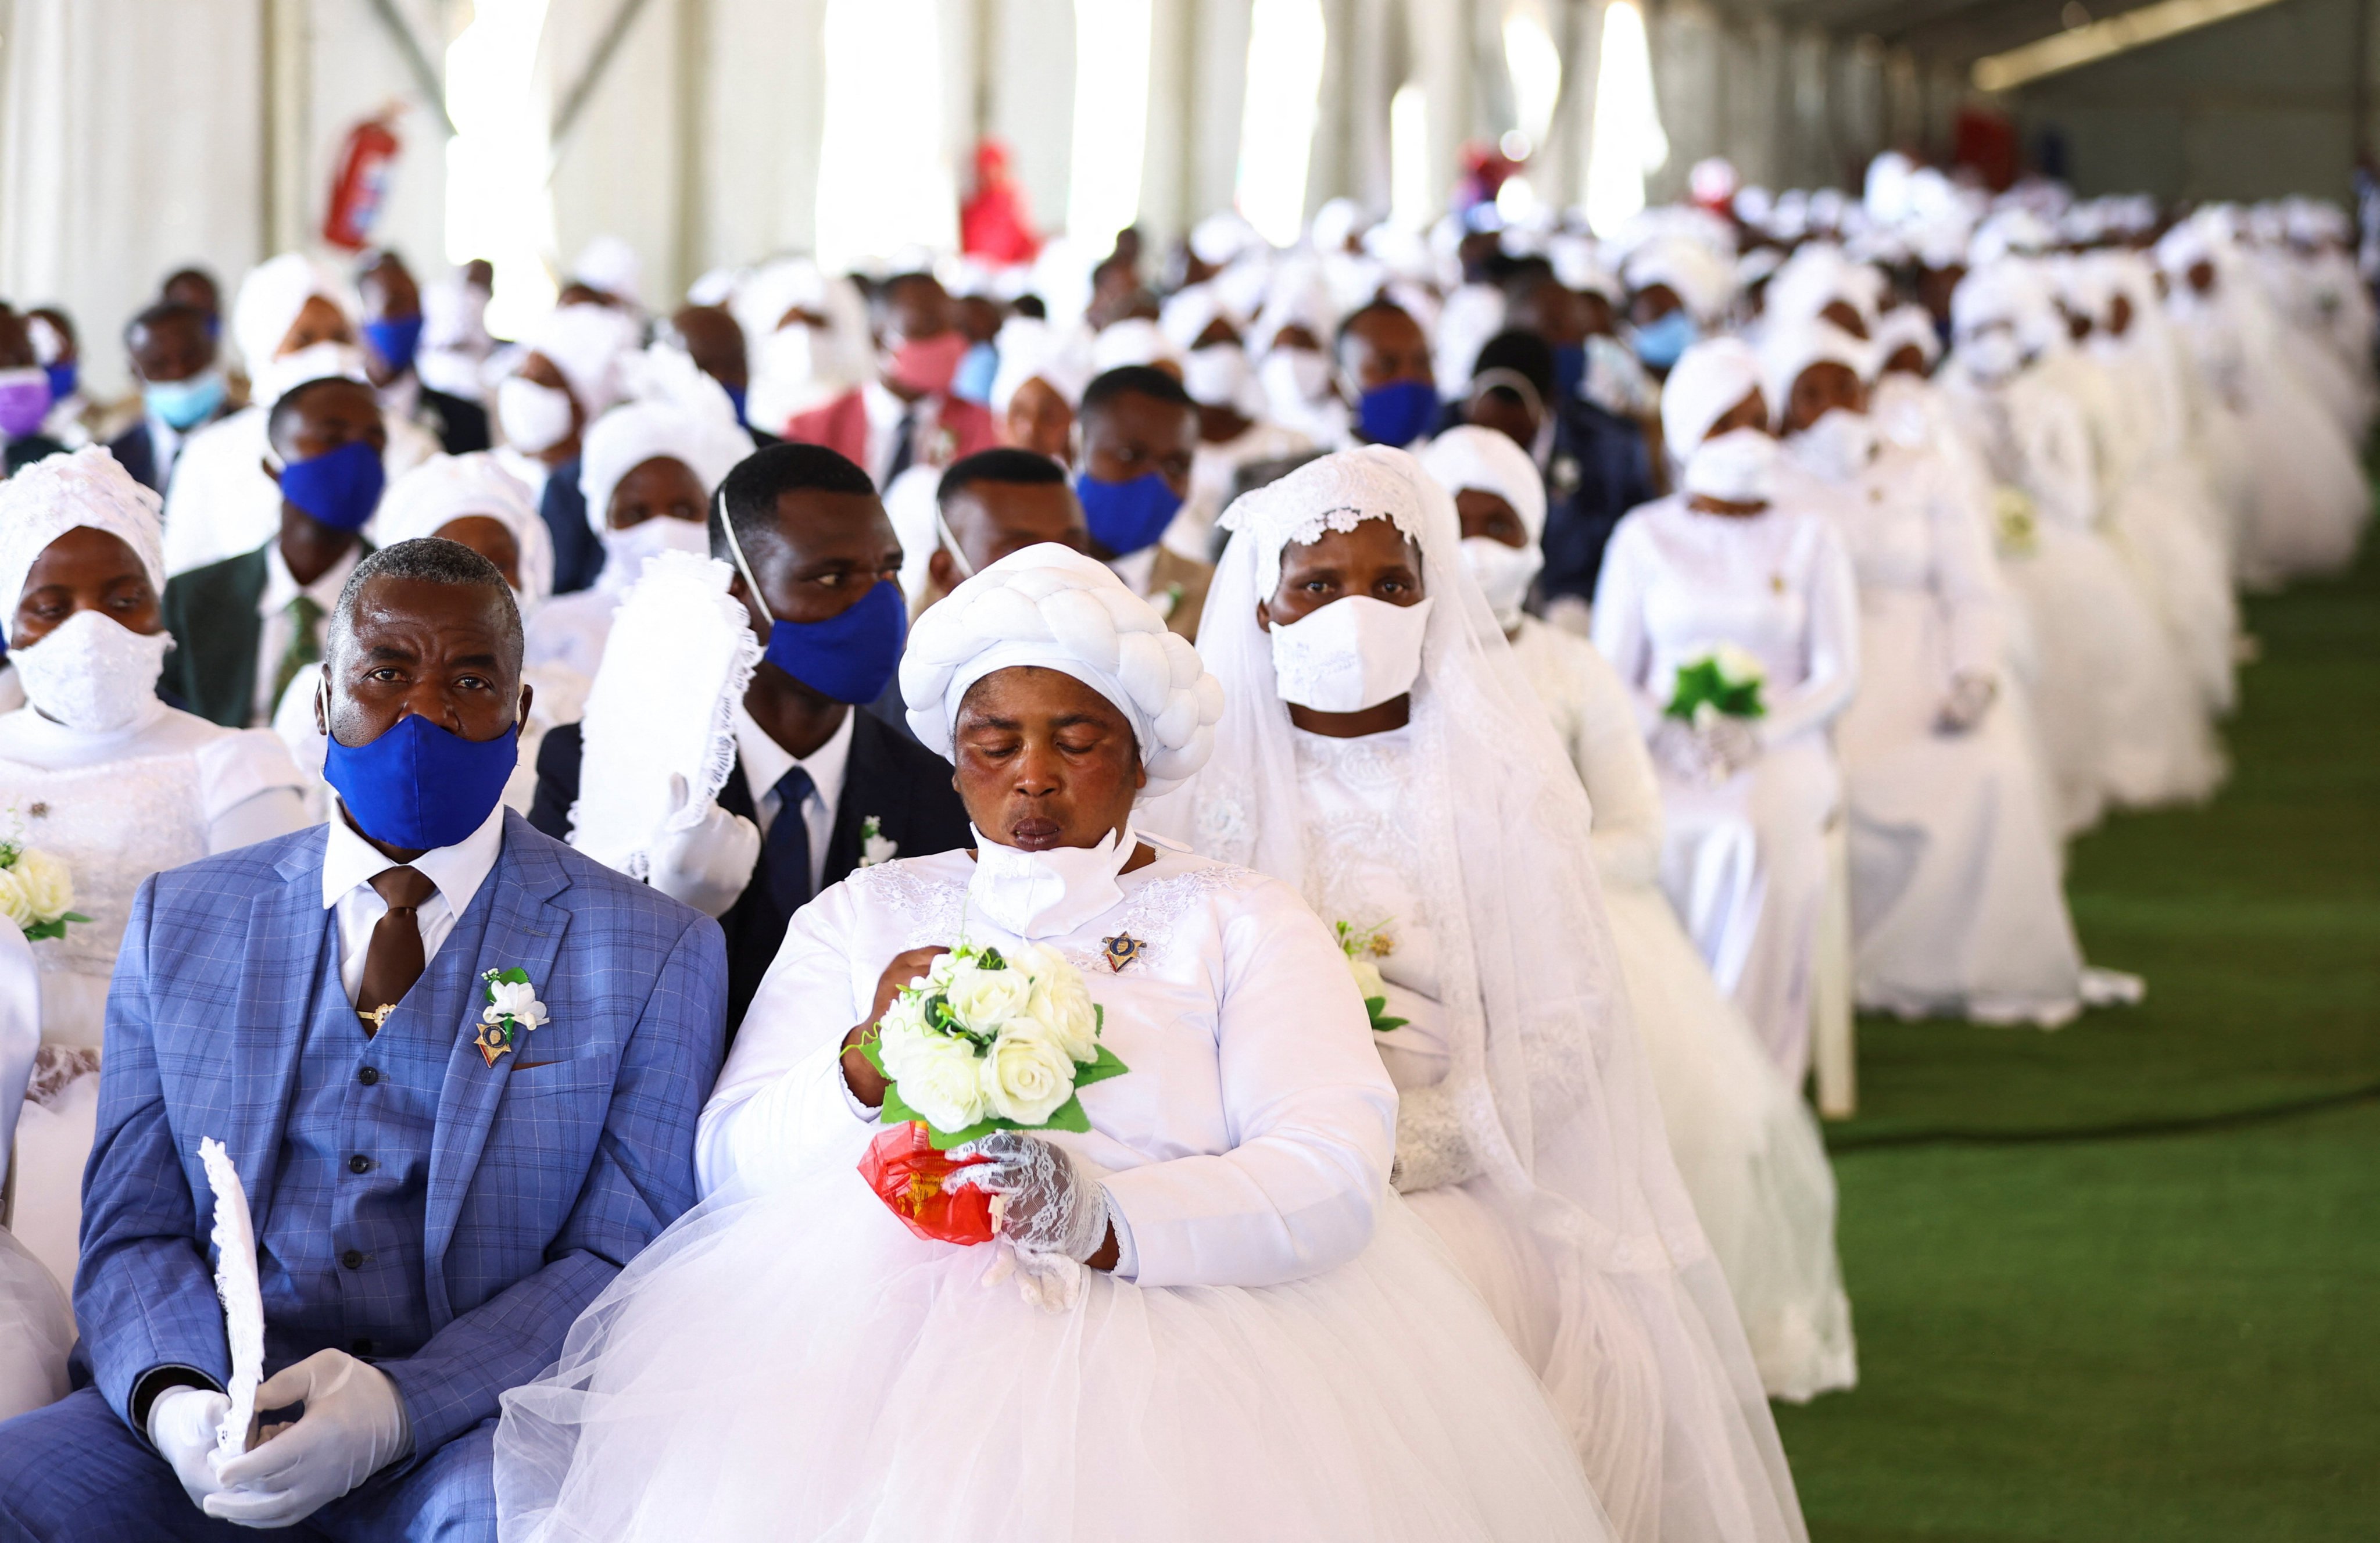 Brides and grooms during a mass wedding ceremony in Kgabalatsane, South Africa on Sunday. Photo: Reuters 